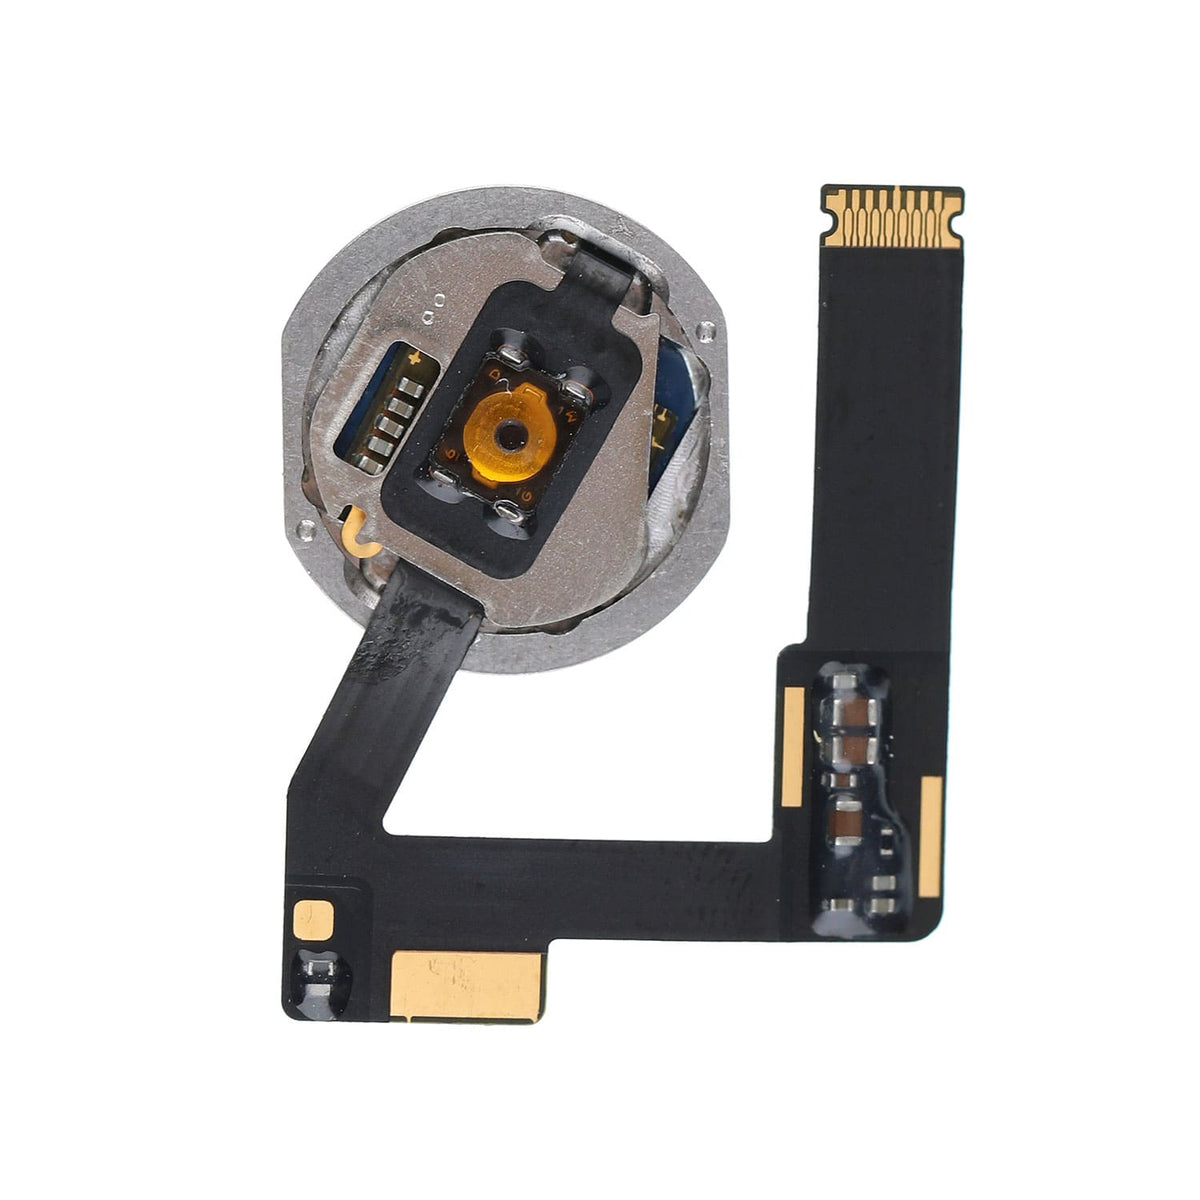 HOME BUTTON ASSEMBLY WITH FLEX CABLE RIBBON FOR IPAD AIR 3/ PRO 10.5" 1ST/12.9" 2ND GEN- BLACK